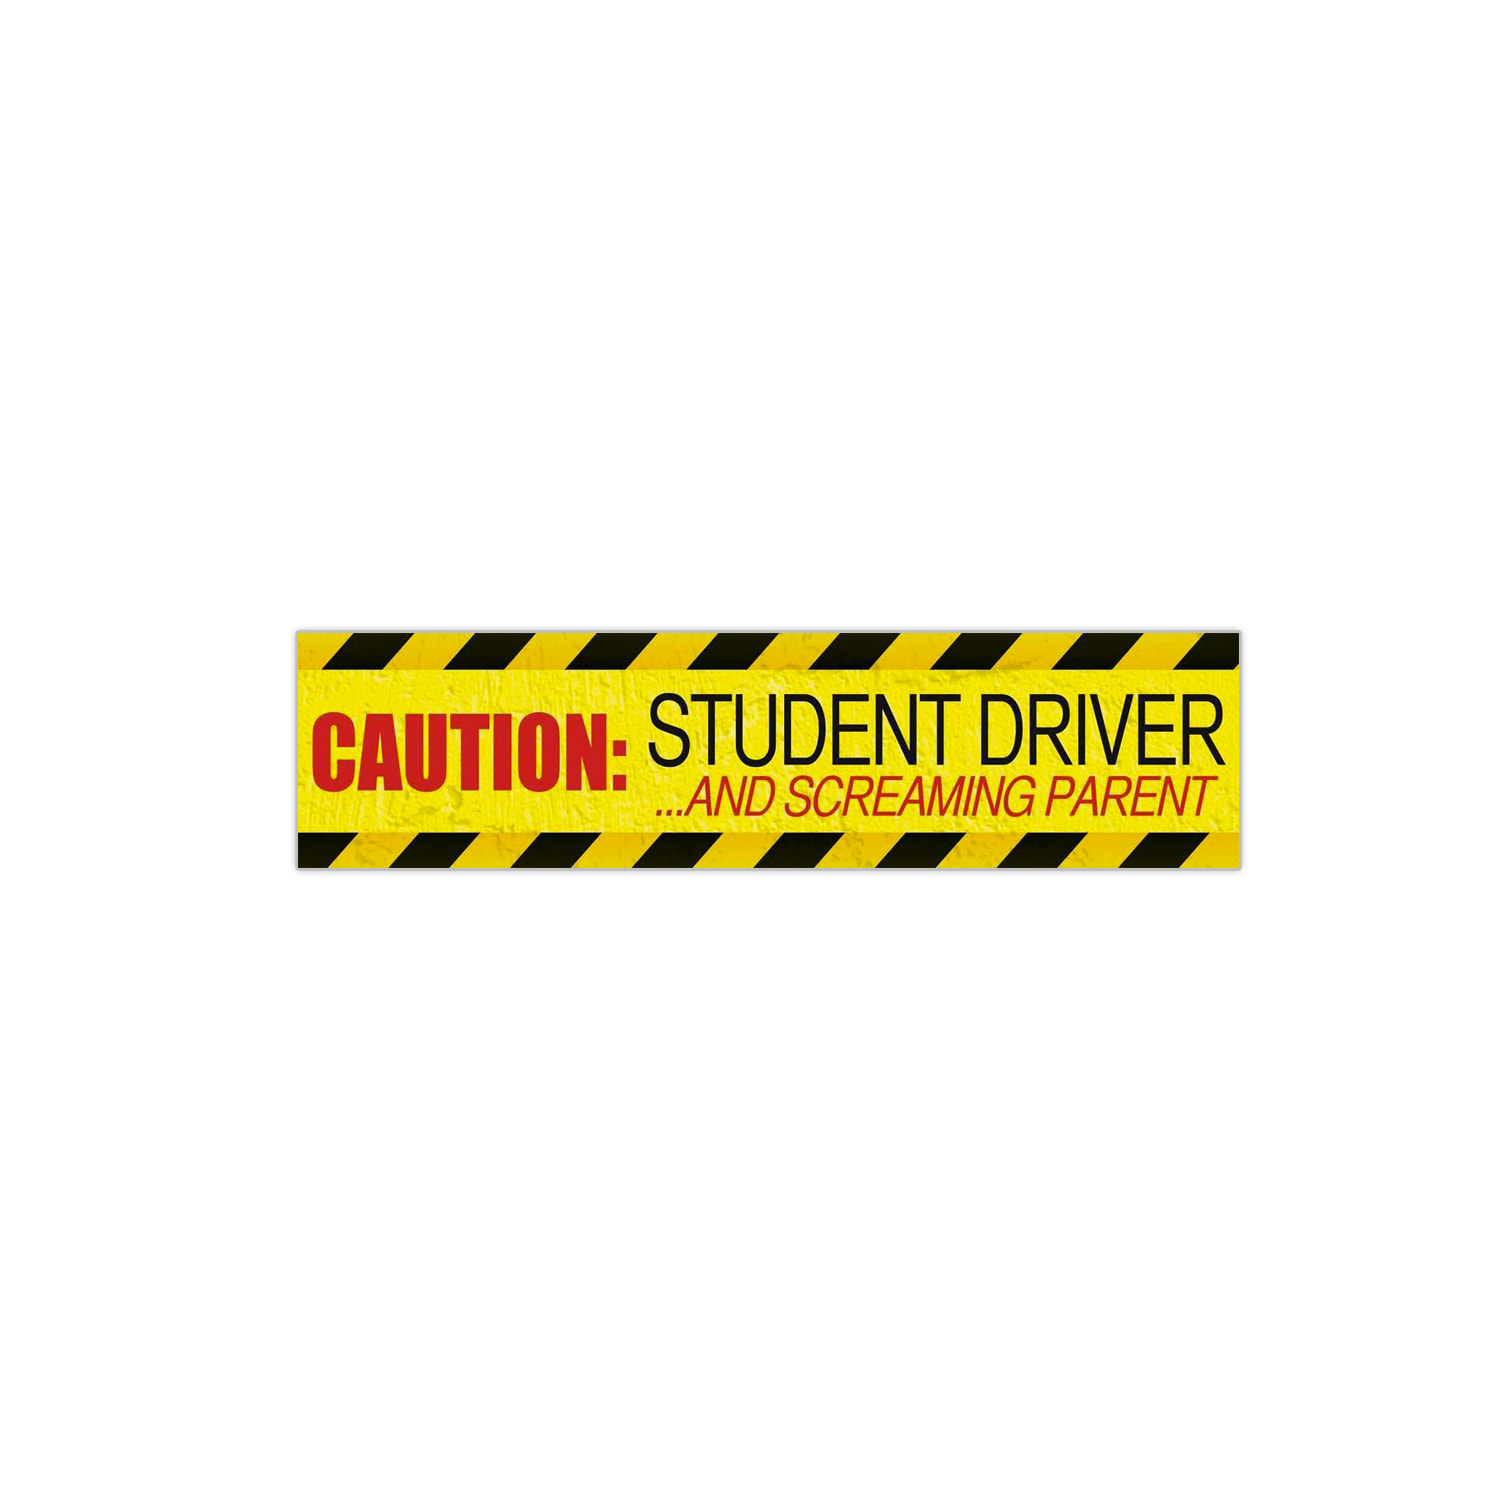 Caution Student Driver and Screaming Parent' Magnet